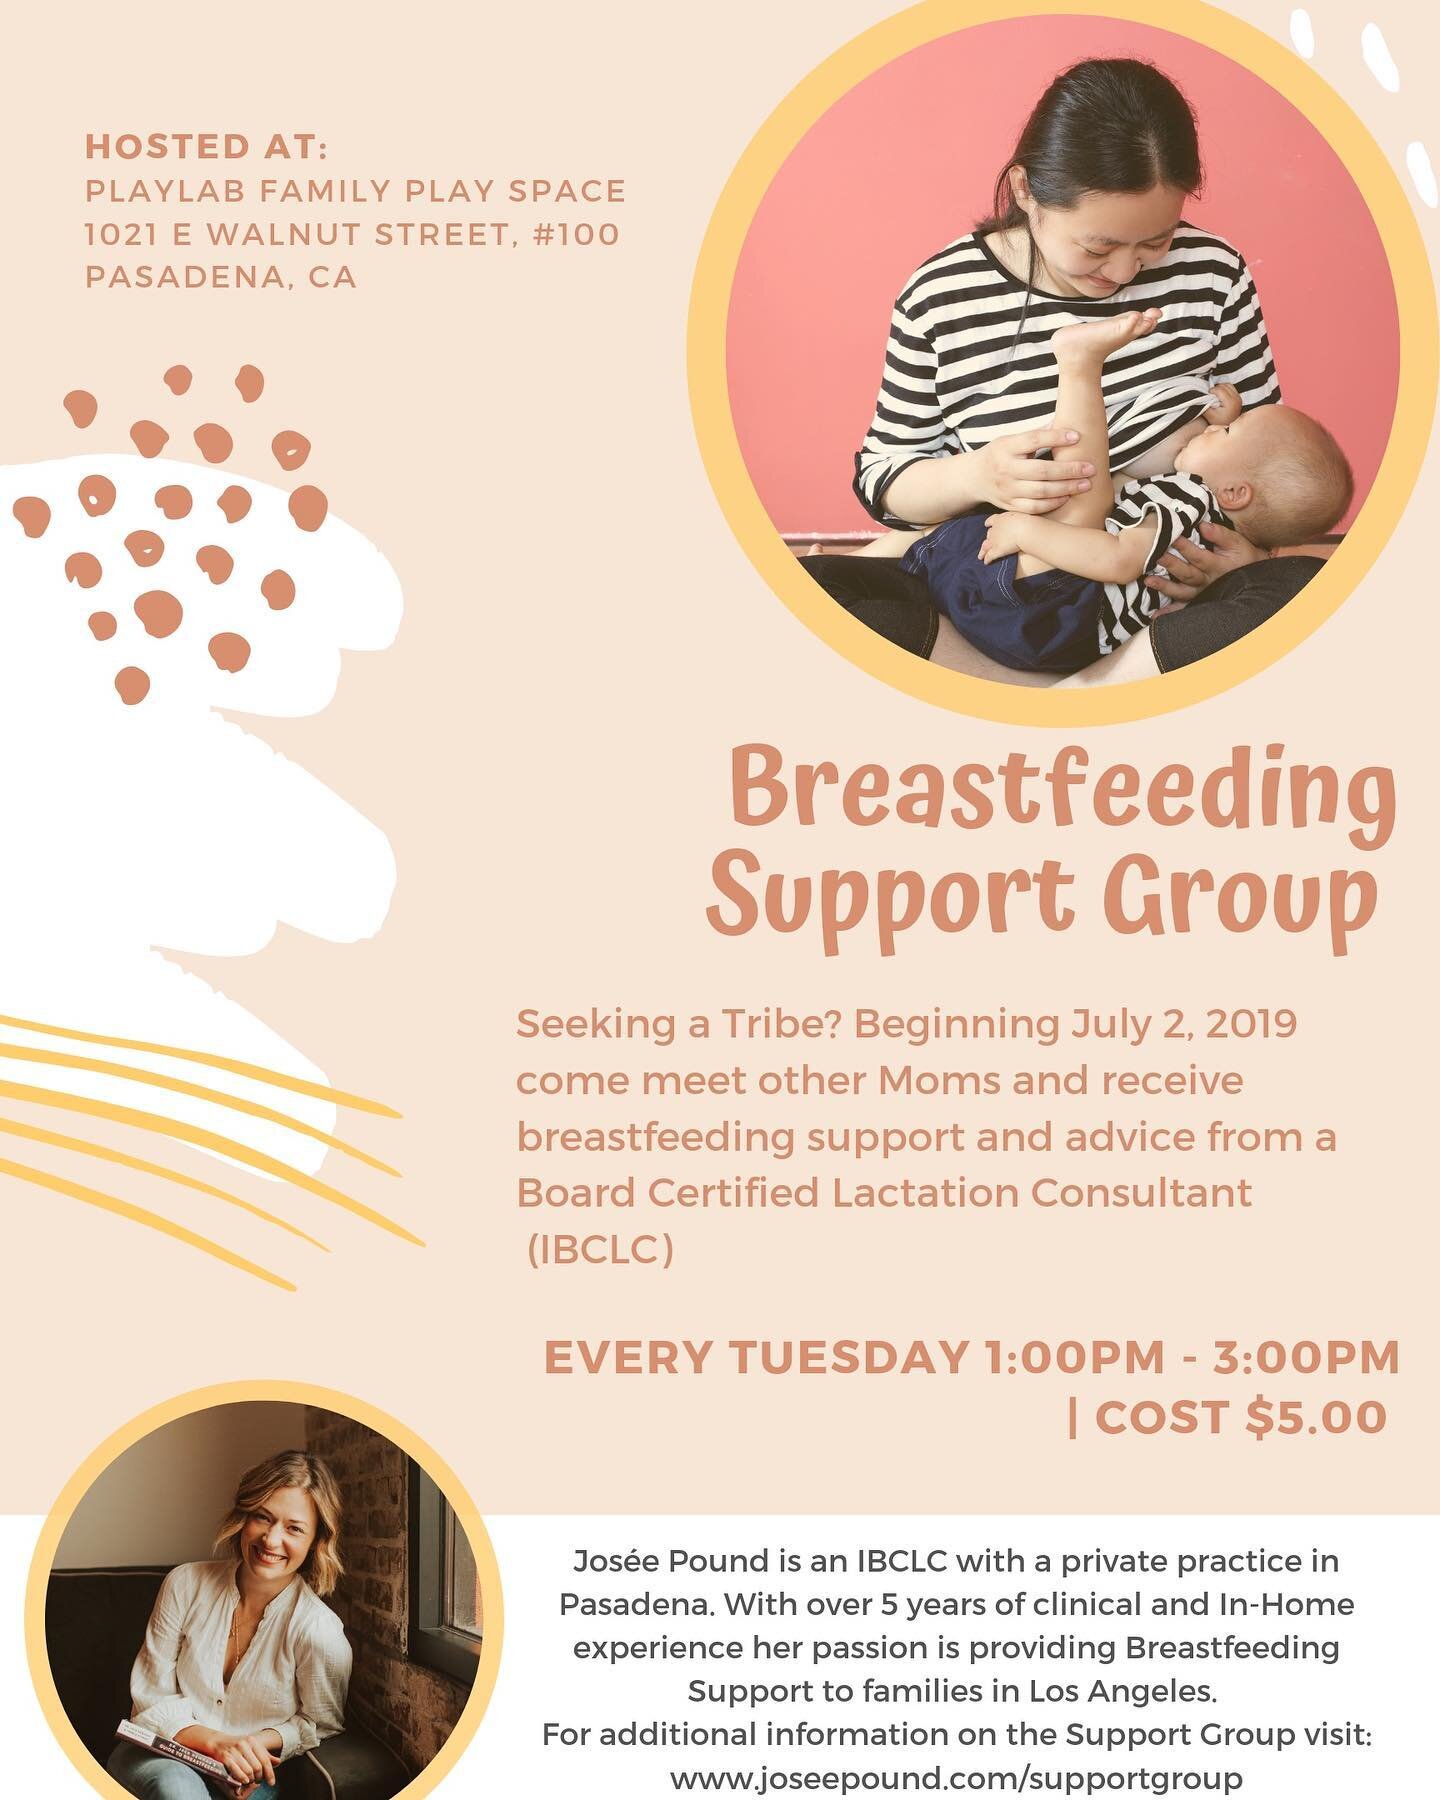 Seeking a Breastfeeding Tribe? ❤️ Starting July 2nd, I will be hosting a NEW Breastfeeding drop in support group every Tuesday from 1:00pm-3:00pm at the @goplaylab Family Playspace in Pasadena! 
Group lead discussions✨✨Monthly guest community speaker